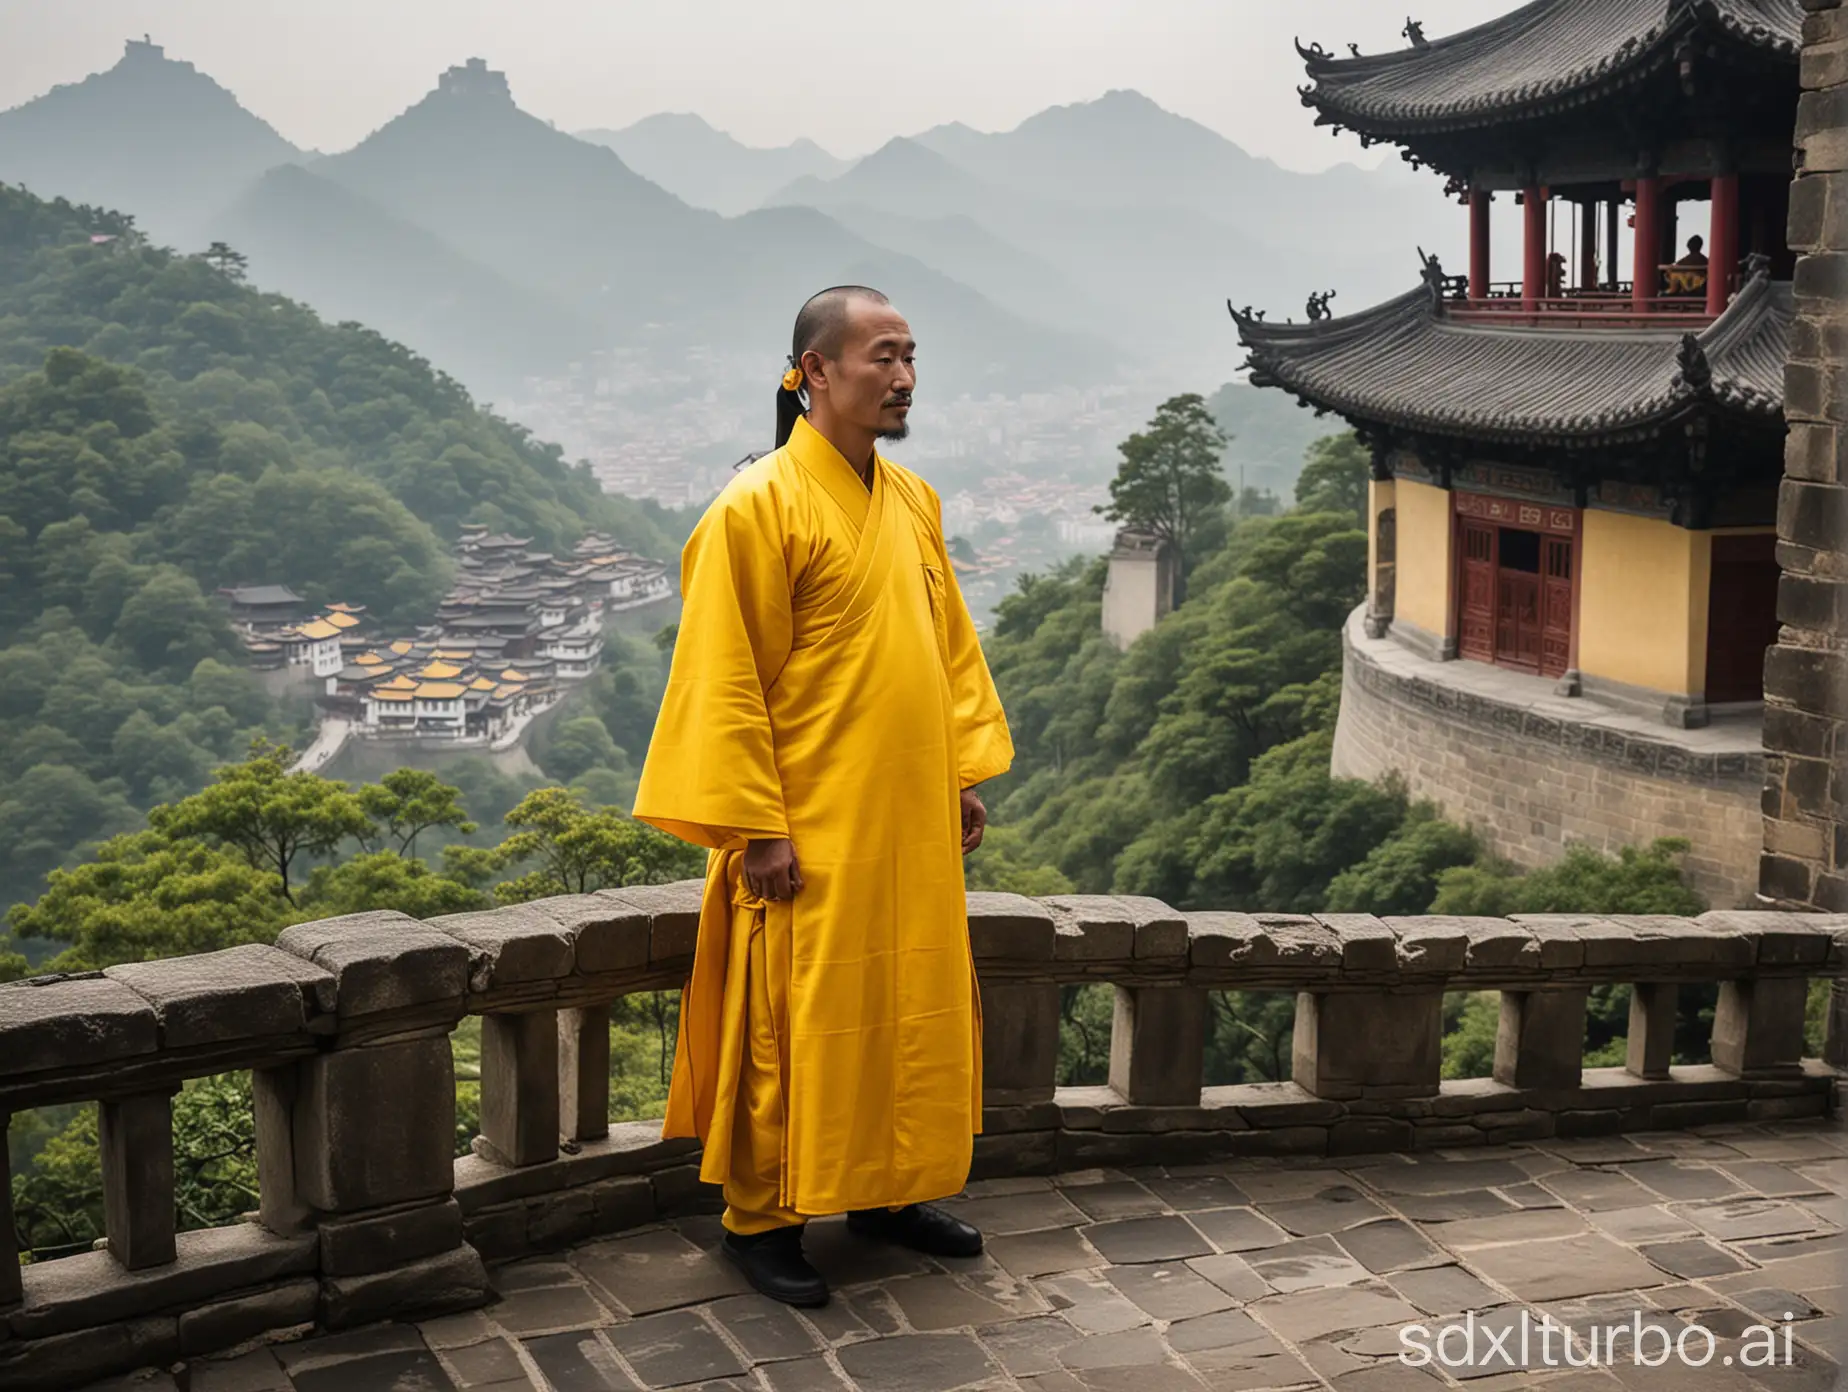 Taoist-Monk-in-Ceremonial-Yellow-Robe-at-Mount-Wudang-Temple